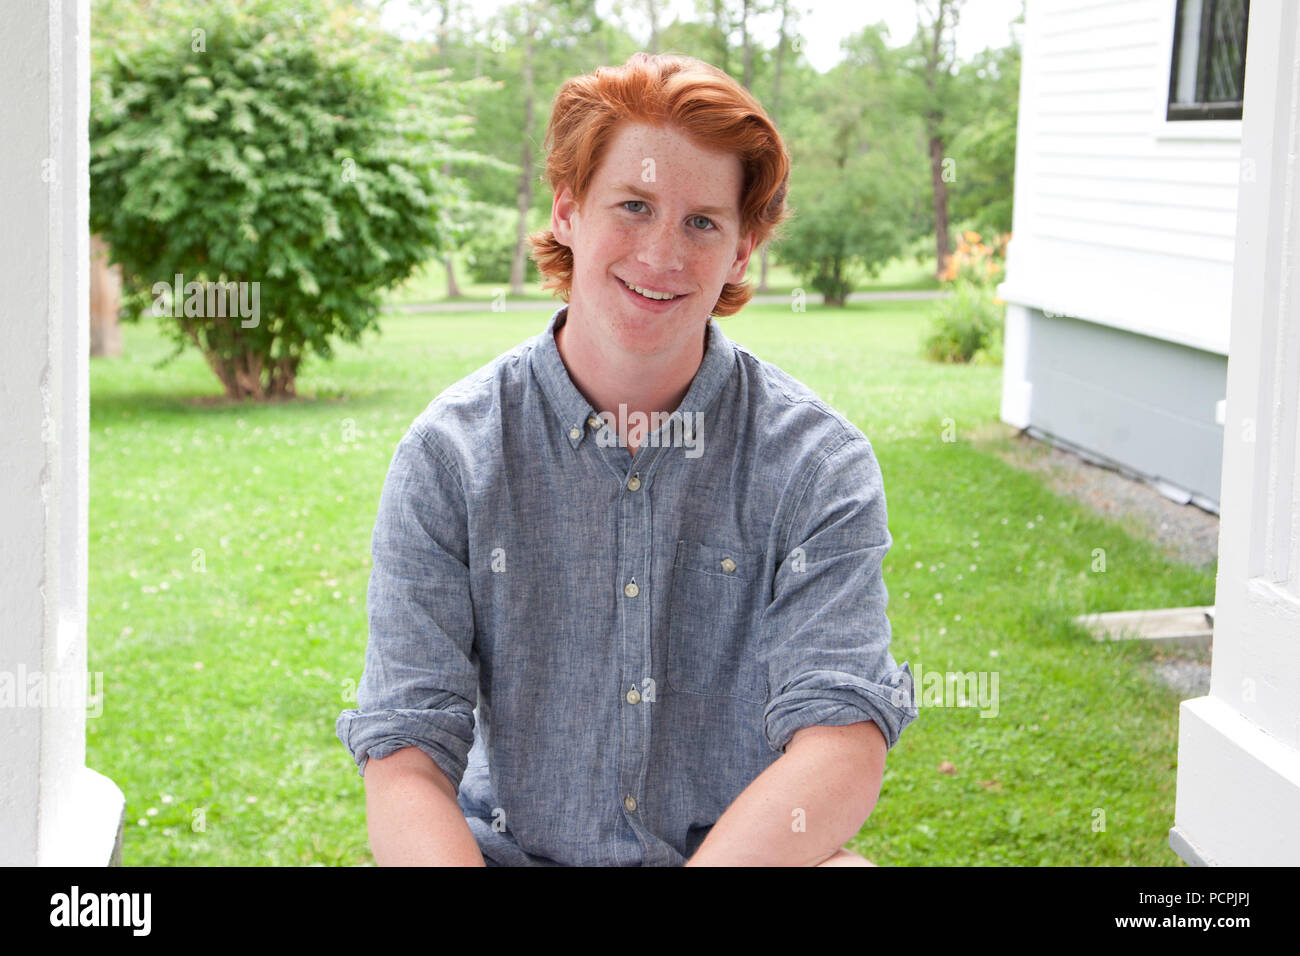 A young high school age teen with ginger hair and freckles poses for a portrait Stock Photo